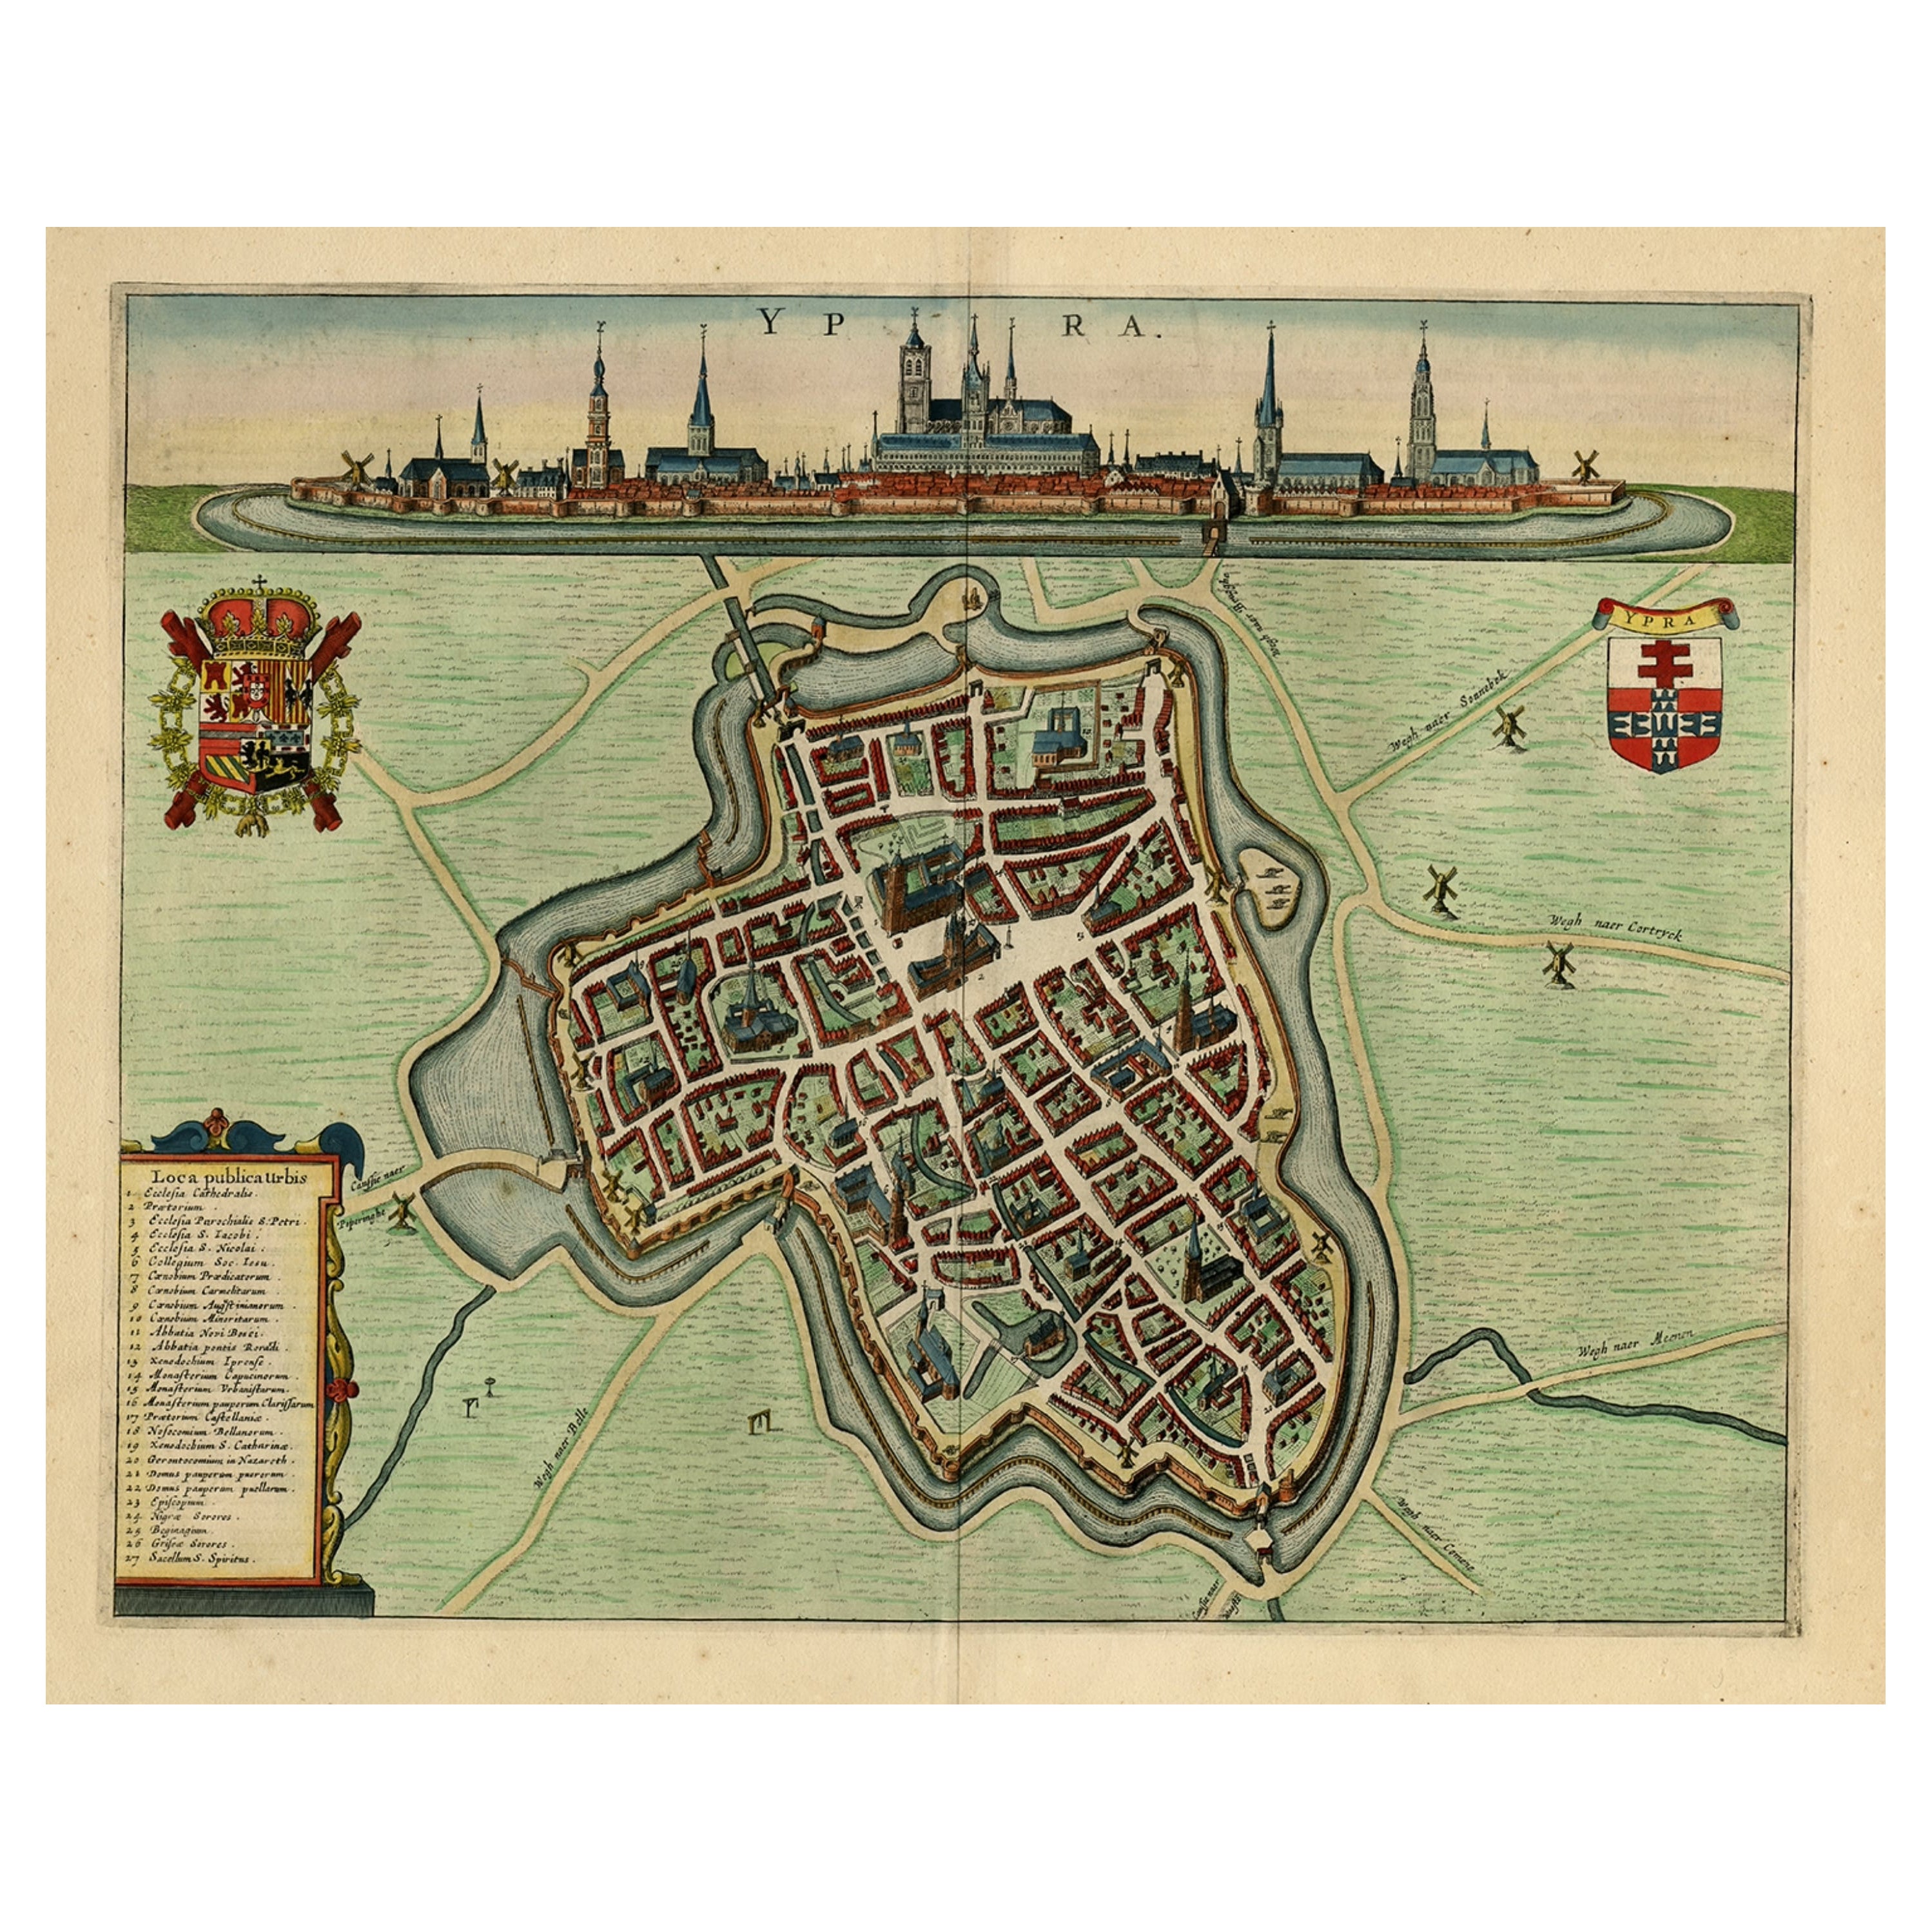 Decorative Bird's-Eye View Plan of Ieper or Ypres in Belgium, 1649 For Sale